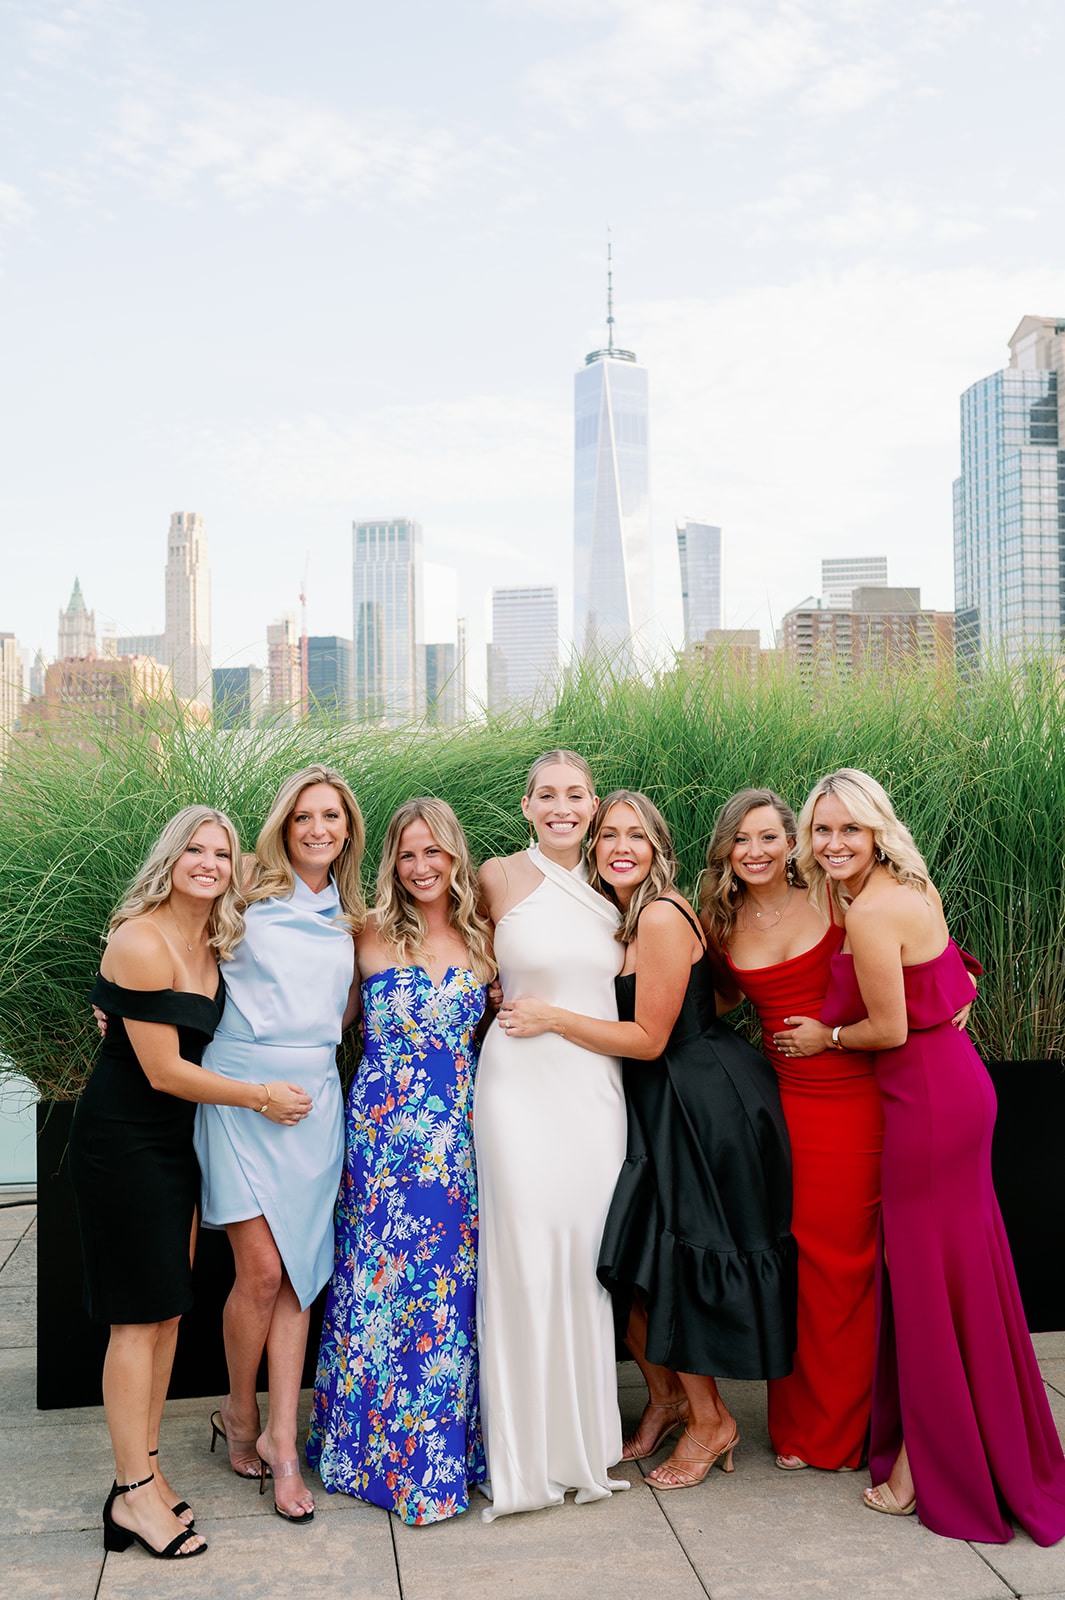 Tribeca Rooftop wedding bride posing with her group of friends at cocktail hour.